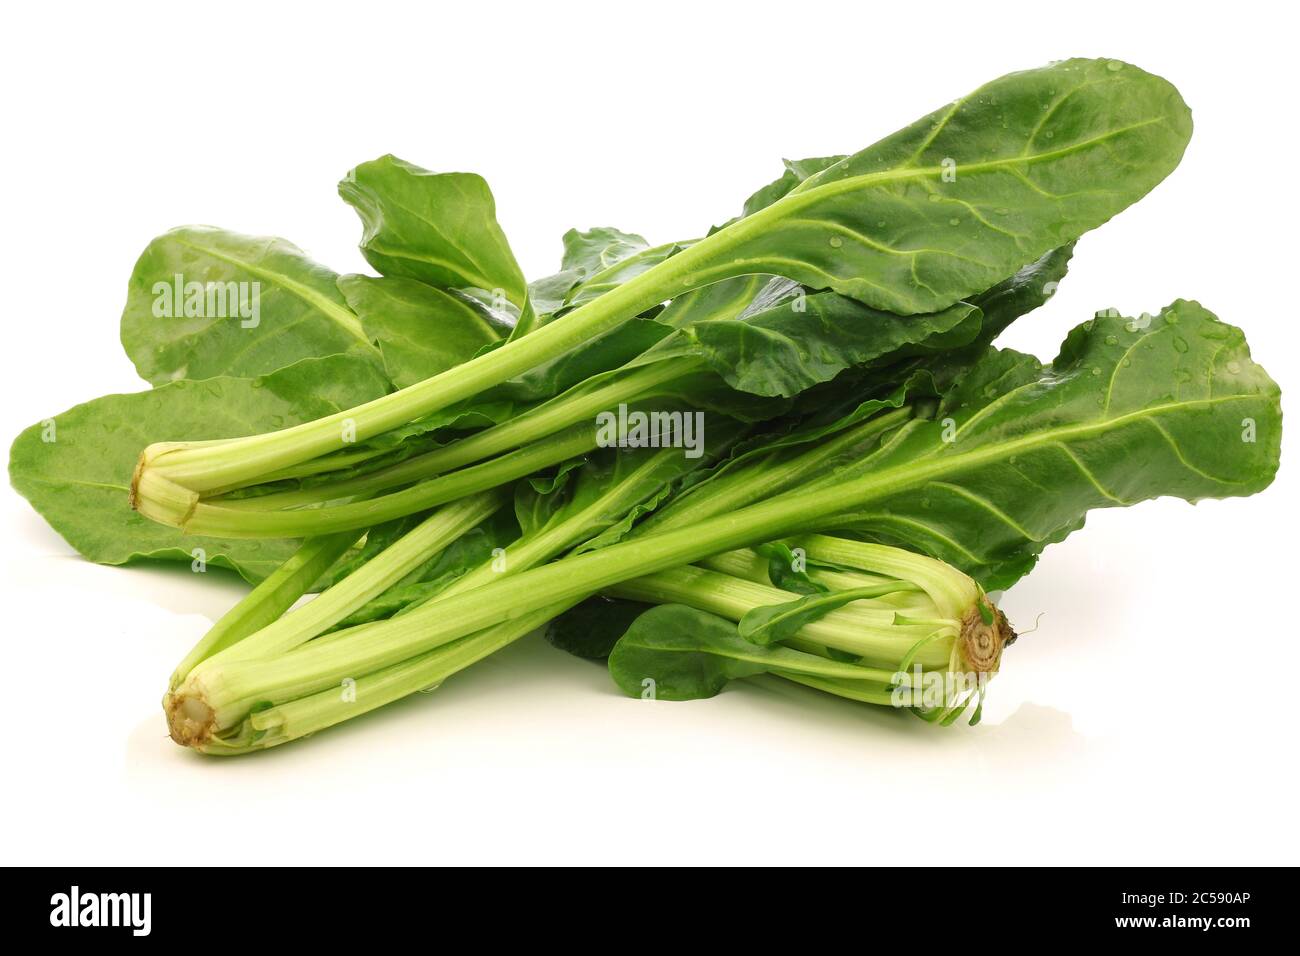 chinese spinach (Ipomoea aquatica) on a white background Stock Photo